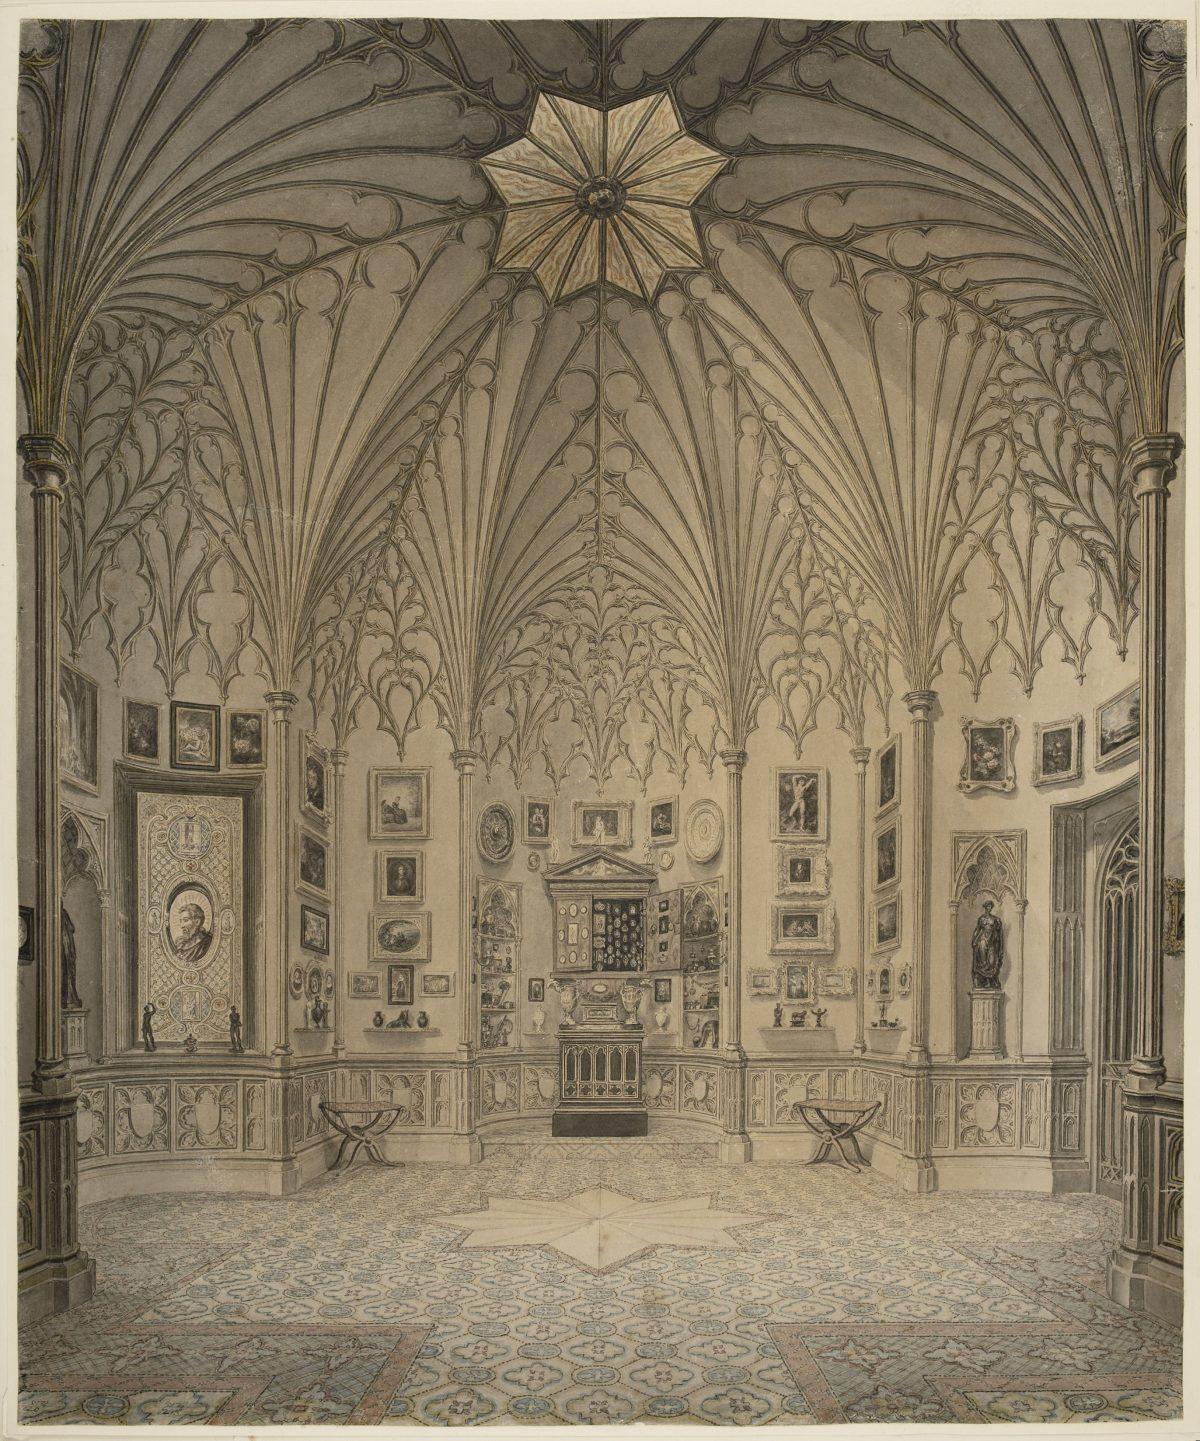 “The Tribune at Strawberry Hill,” circa 1789, drawing by John Carter. Original illustrations were used to place Walpole’s collection back as he intended. Note the rosewood cabinet in the center. (The Lewis Walpole Library, Yale University)